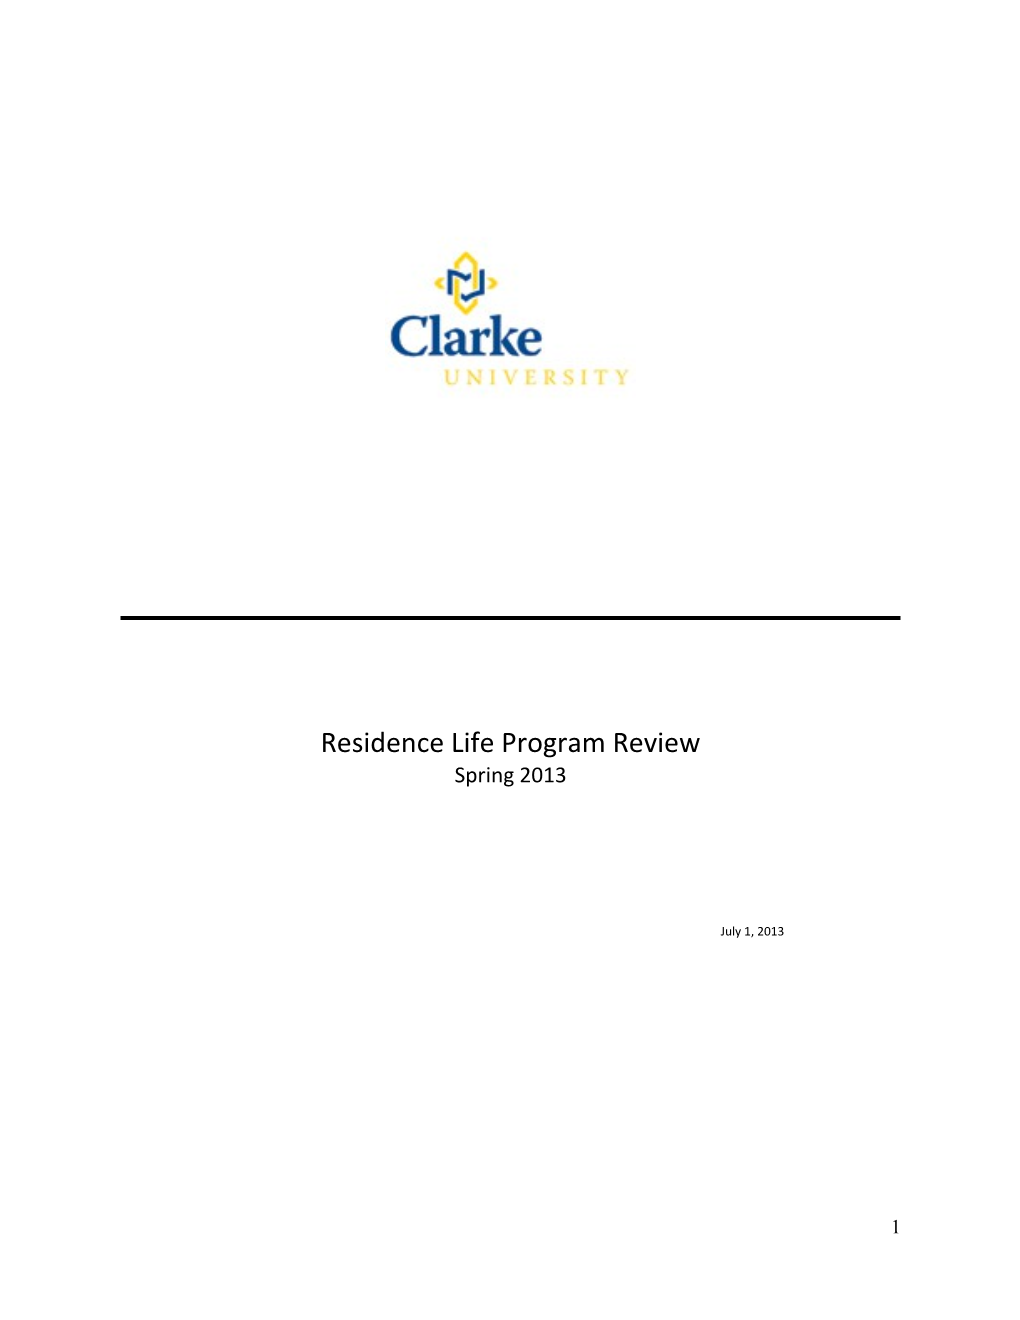 Residence Life Program Review Evaluation